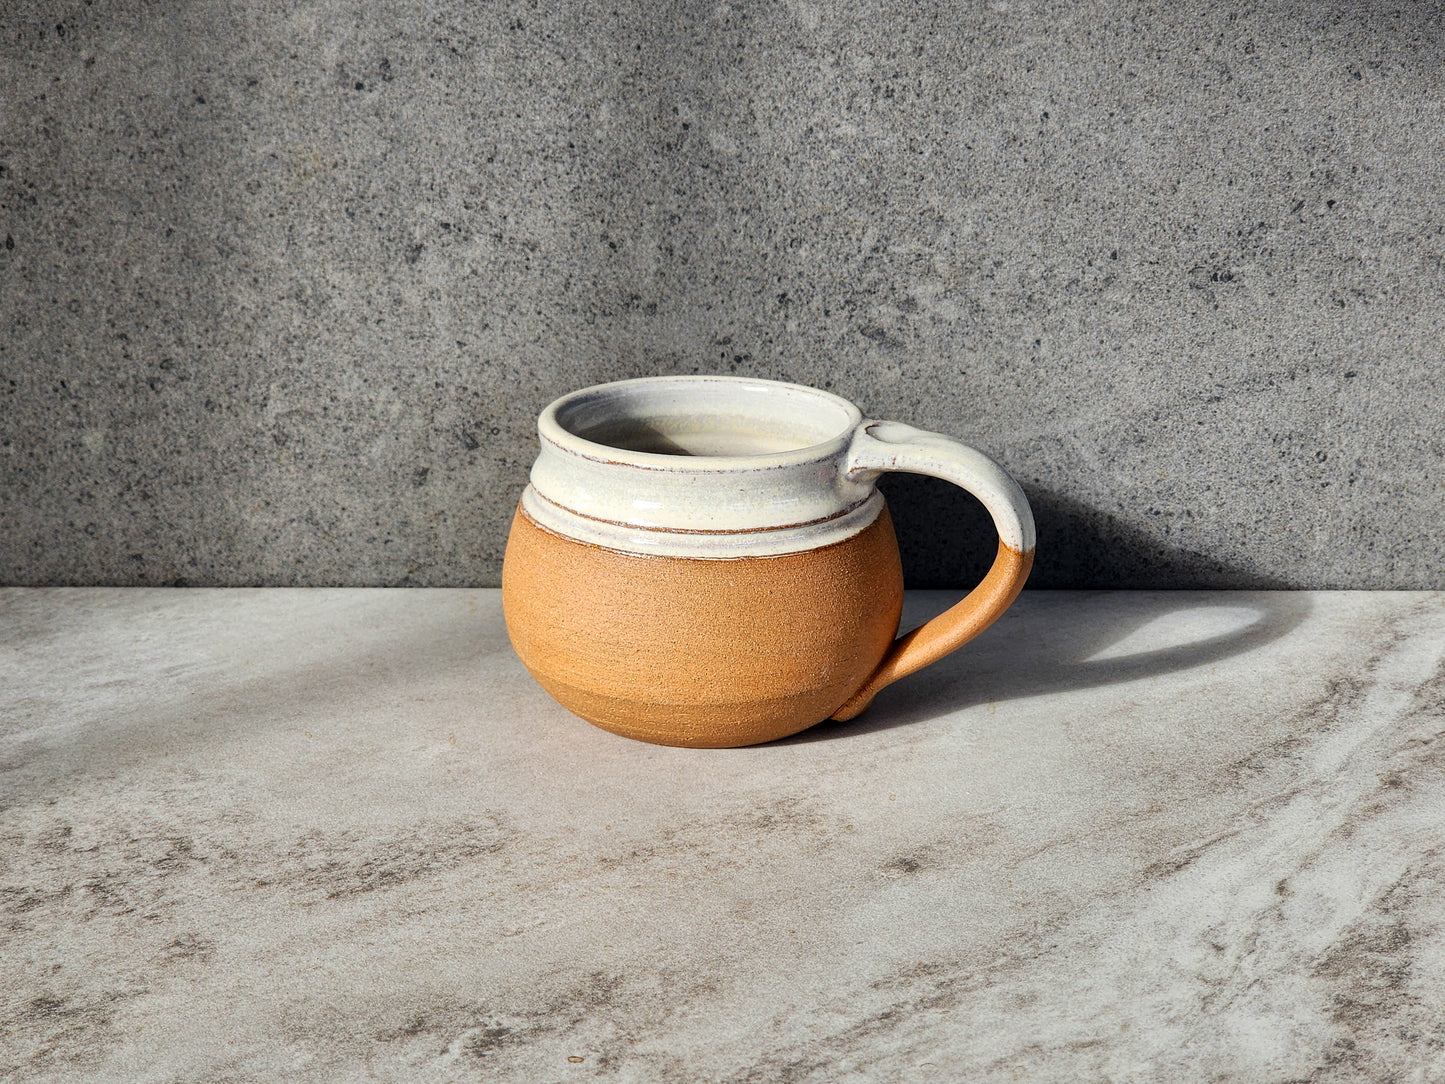 Natural: Celebrate simplicity with the Natural small mug by Clinton Pottery. Its unglazed, earthy finish highlights the natural beauty of the clay, creating a rustic yet refined look. Whether you're enjoying a morning cup of coffee or an evening herbal tea, this mug is a timeless addition to your kitchen.